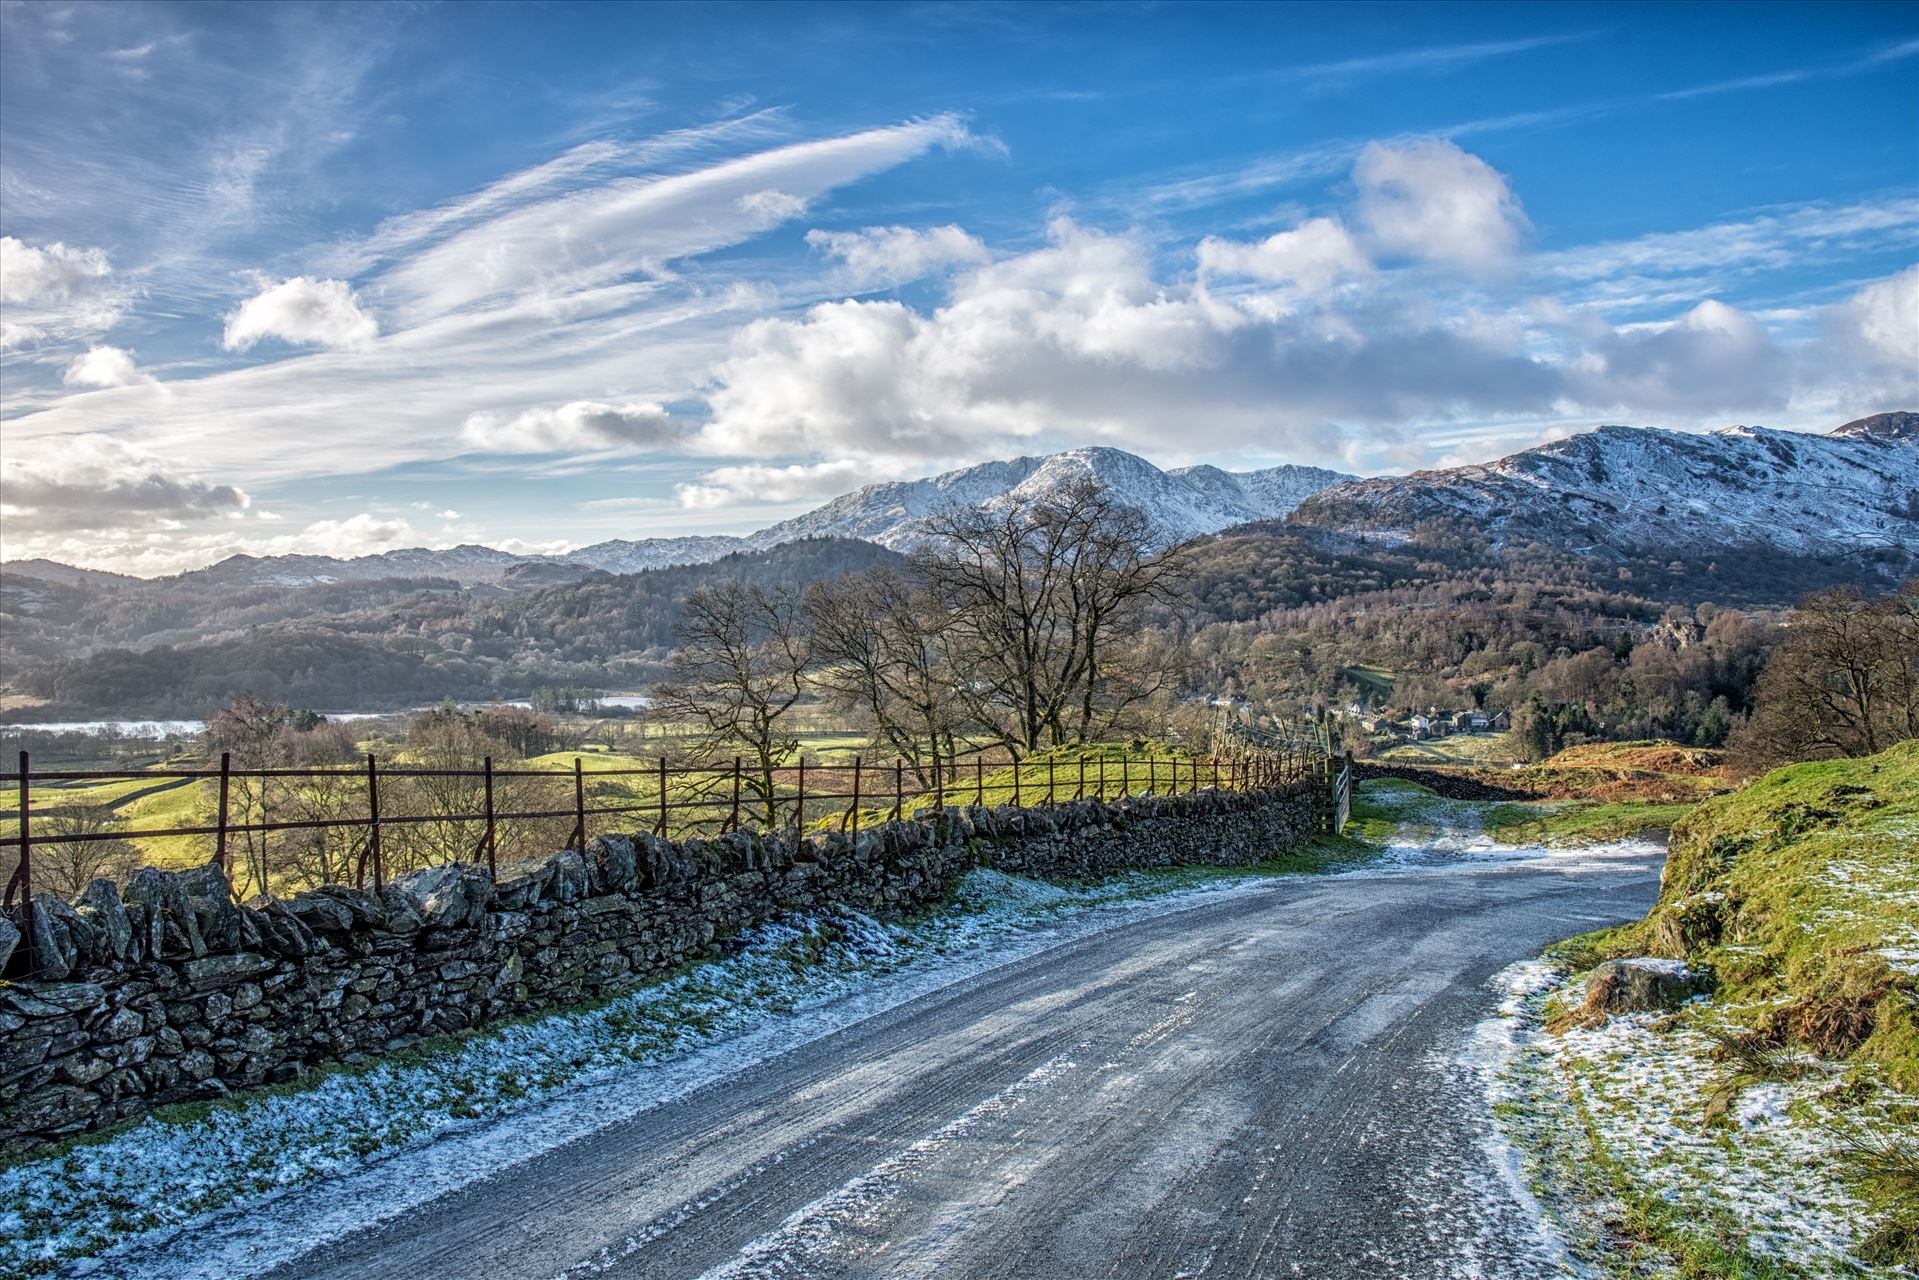 Snowy mountains above Chapel Stile - A snowy landscape shot taken in the Lake District. by philreay